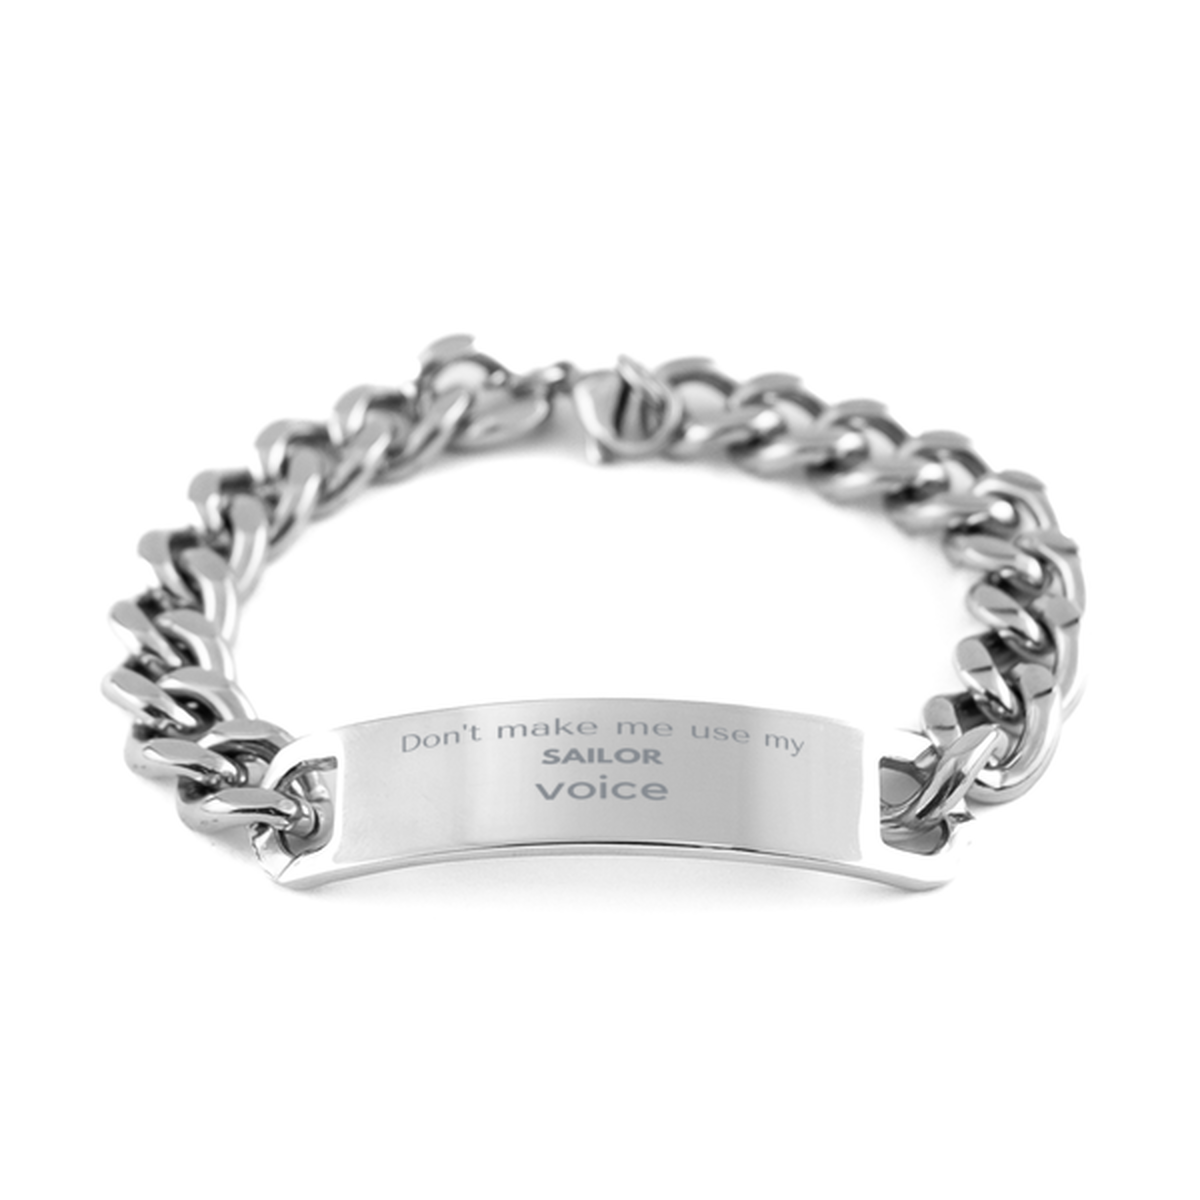 Don't make me use my Sailor voice, Sarcasm Sailor Gifts, Christmas Sailor Cuban Chain Stainless Steel Bracelet Birthday Unique Gifts For Sailor Coworkers, Men, Women, Colleague, Friends